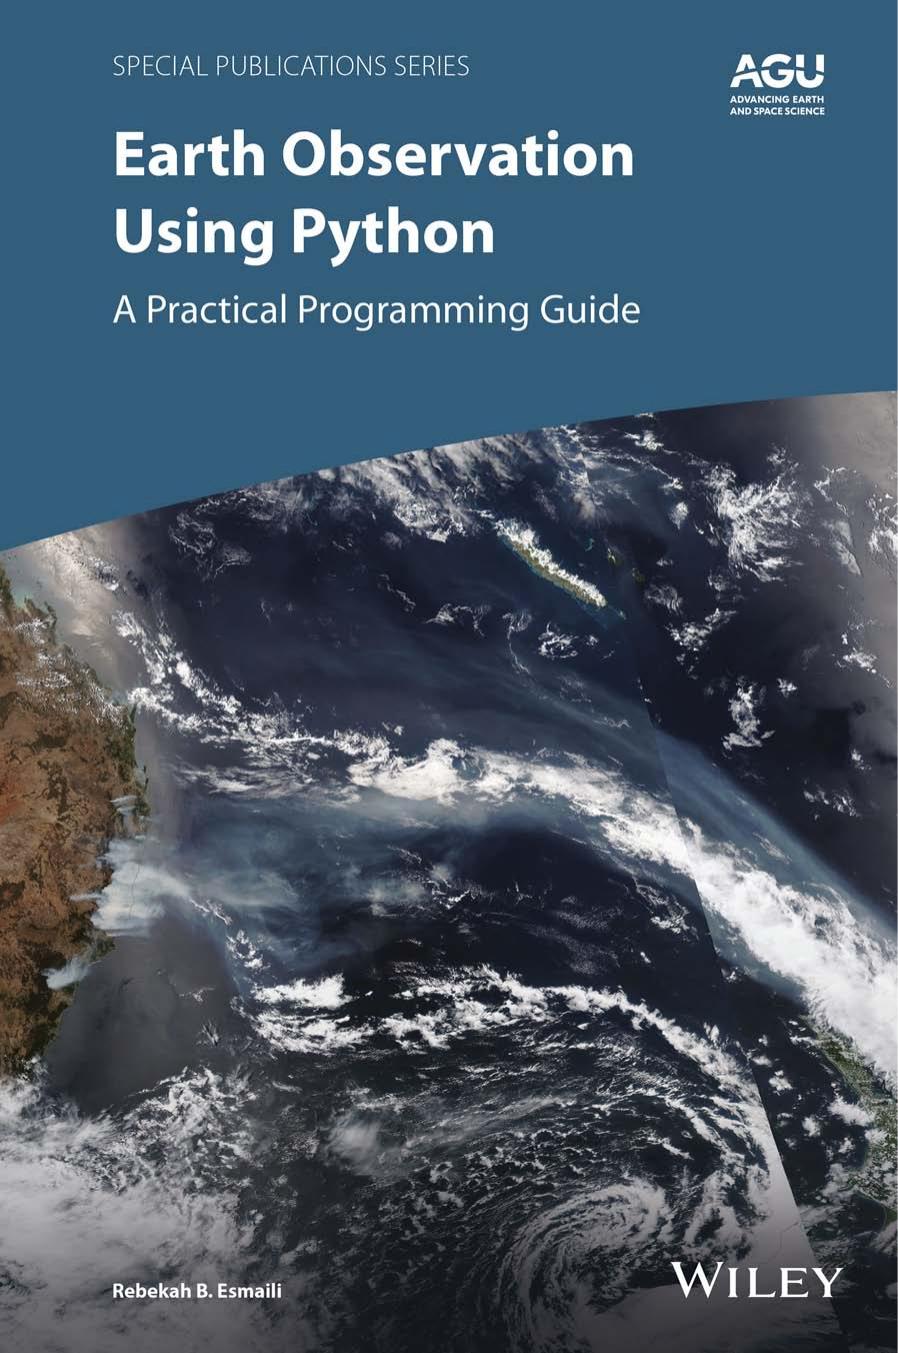 Earth Observation Using Python. A Practical Programming Guide by Rebekah B. Esmaili